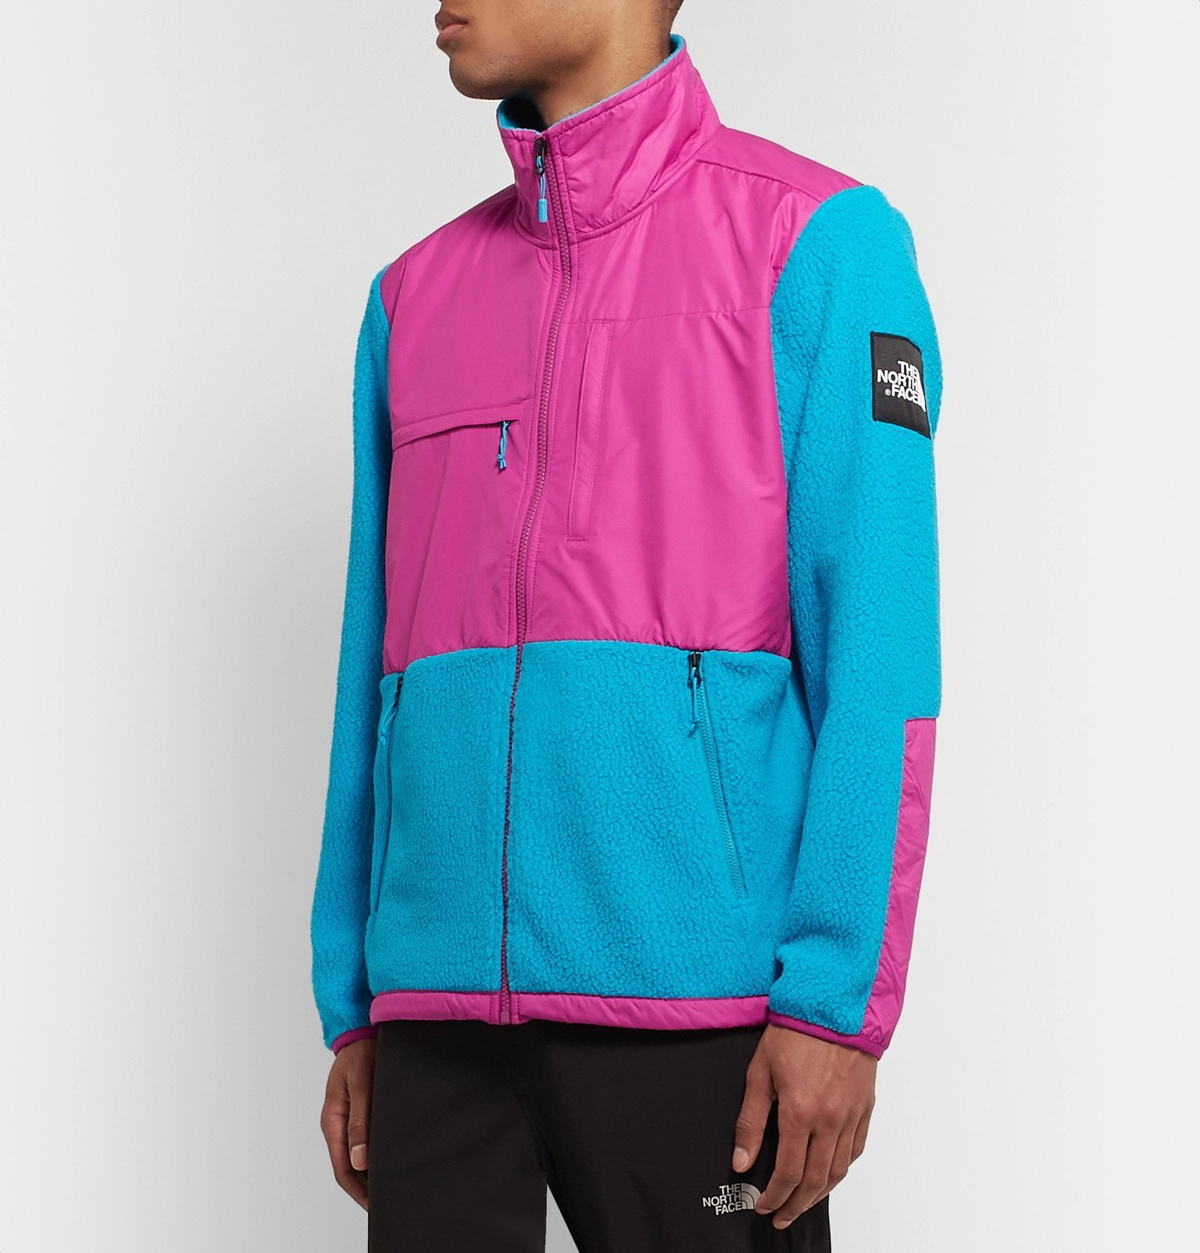 The North Face Denali Cropped Fleece Jacket in Blue